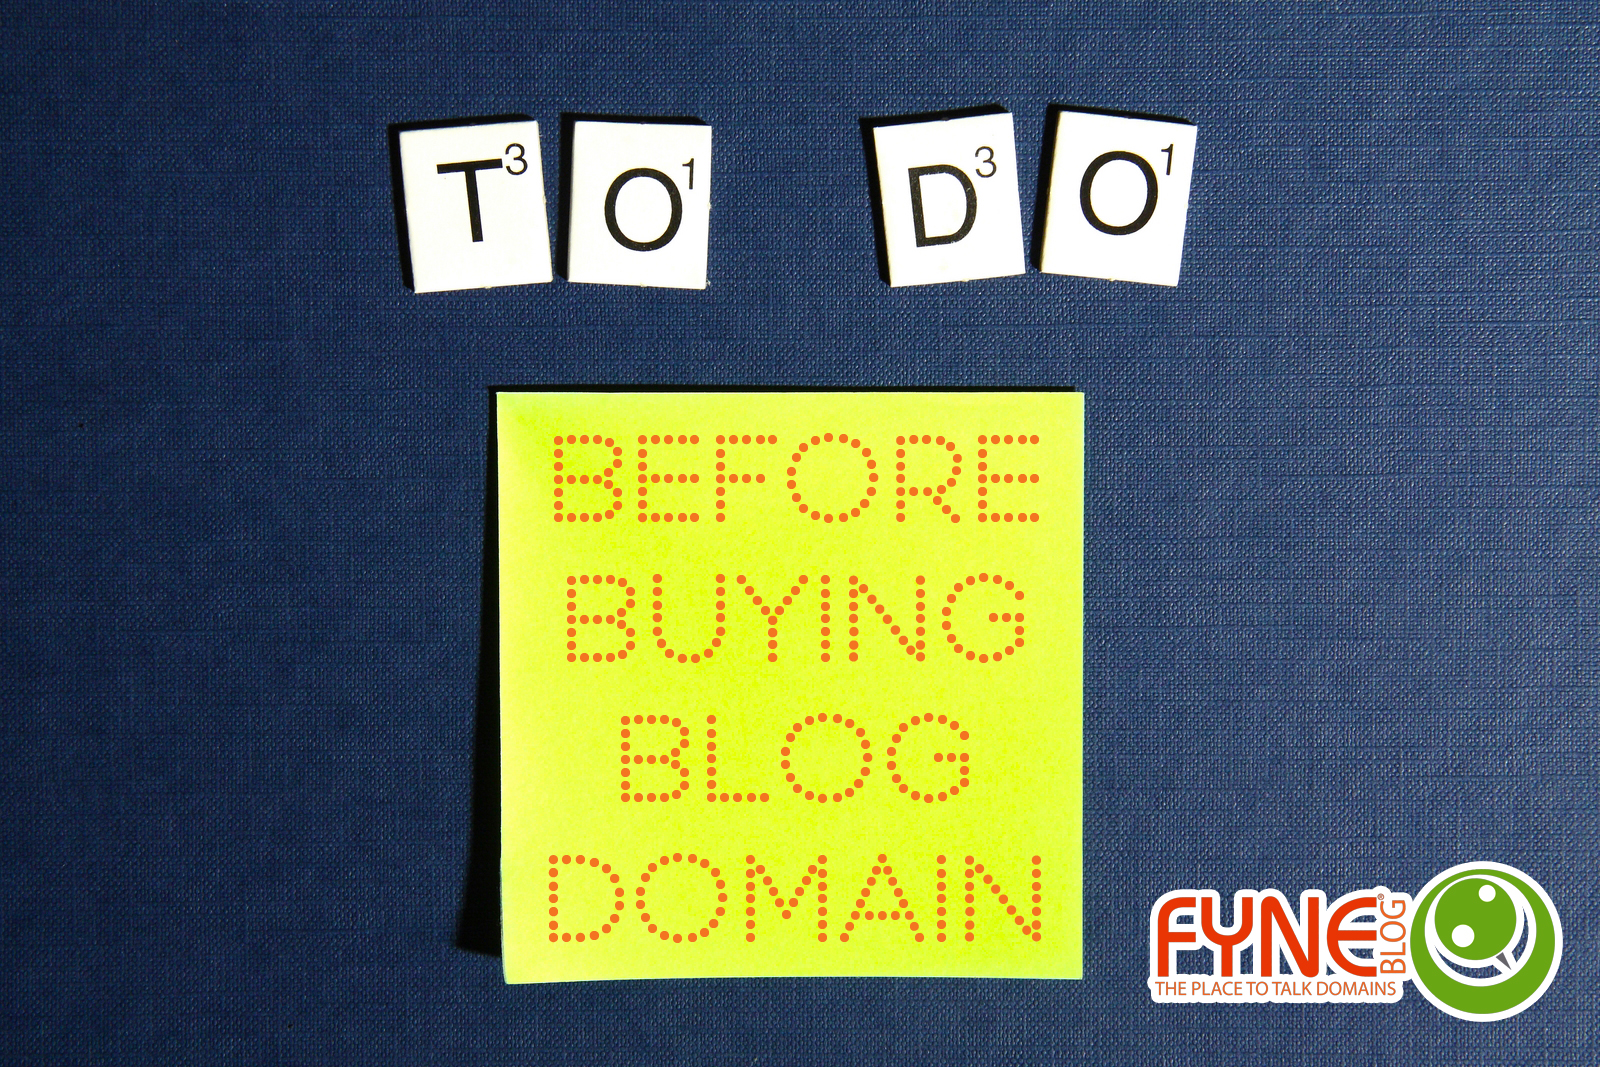 FYNE Blog - Three Must-do's BEFORE Buying Your Blog Domain Name